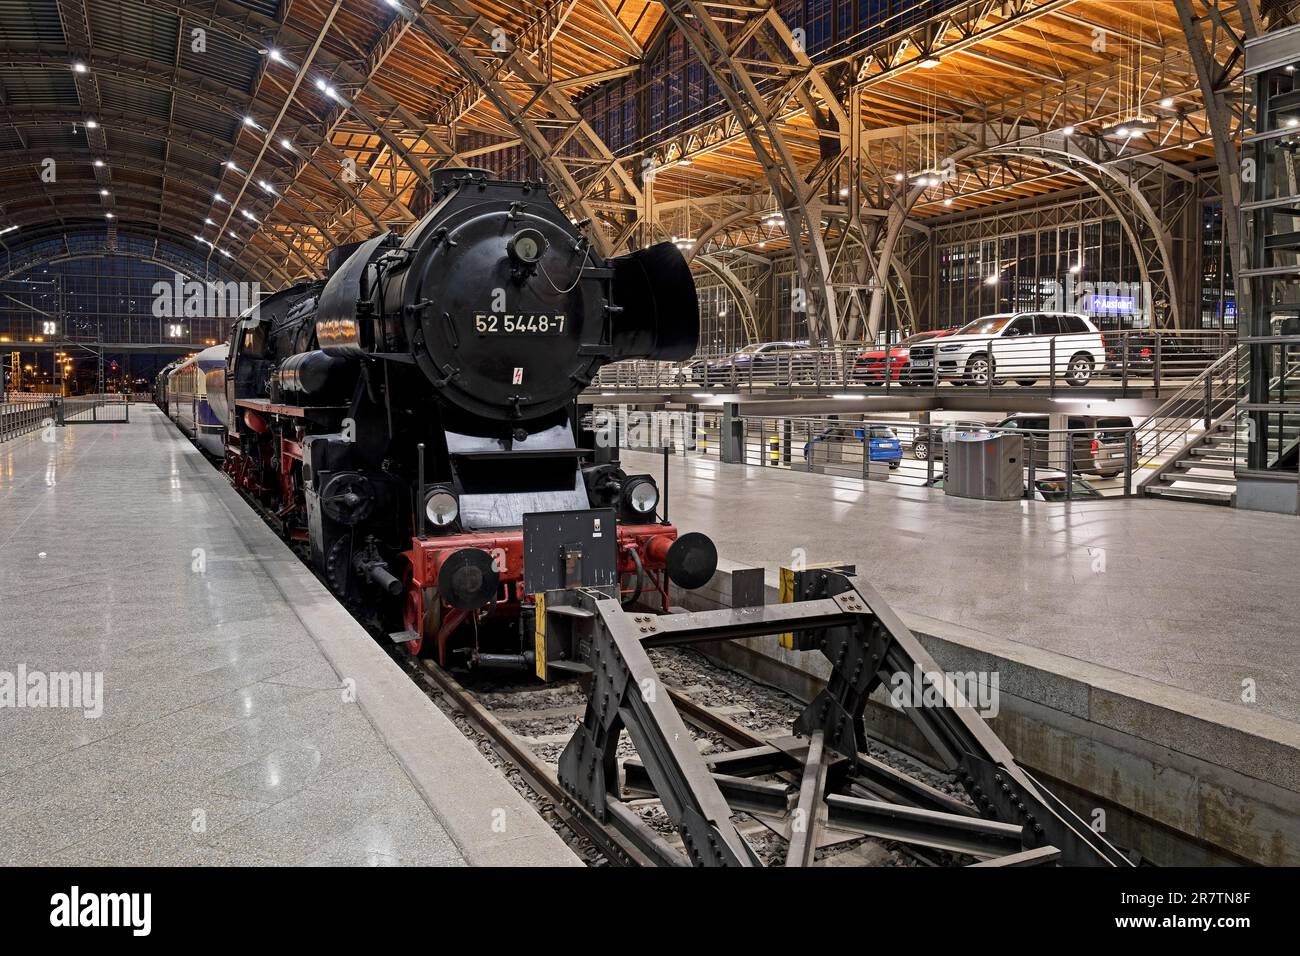 Steam locomotive on museum track 24 as a visual separation from the car parking spaces in the main station, Leipzig, Saxony, Germany Stock Photo